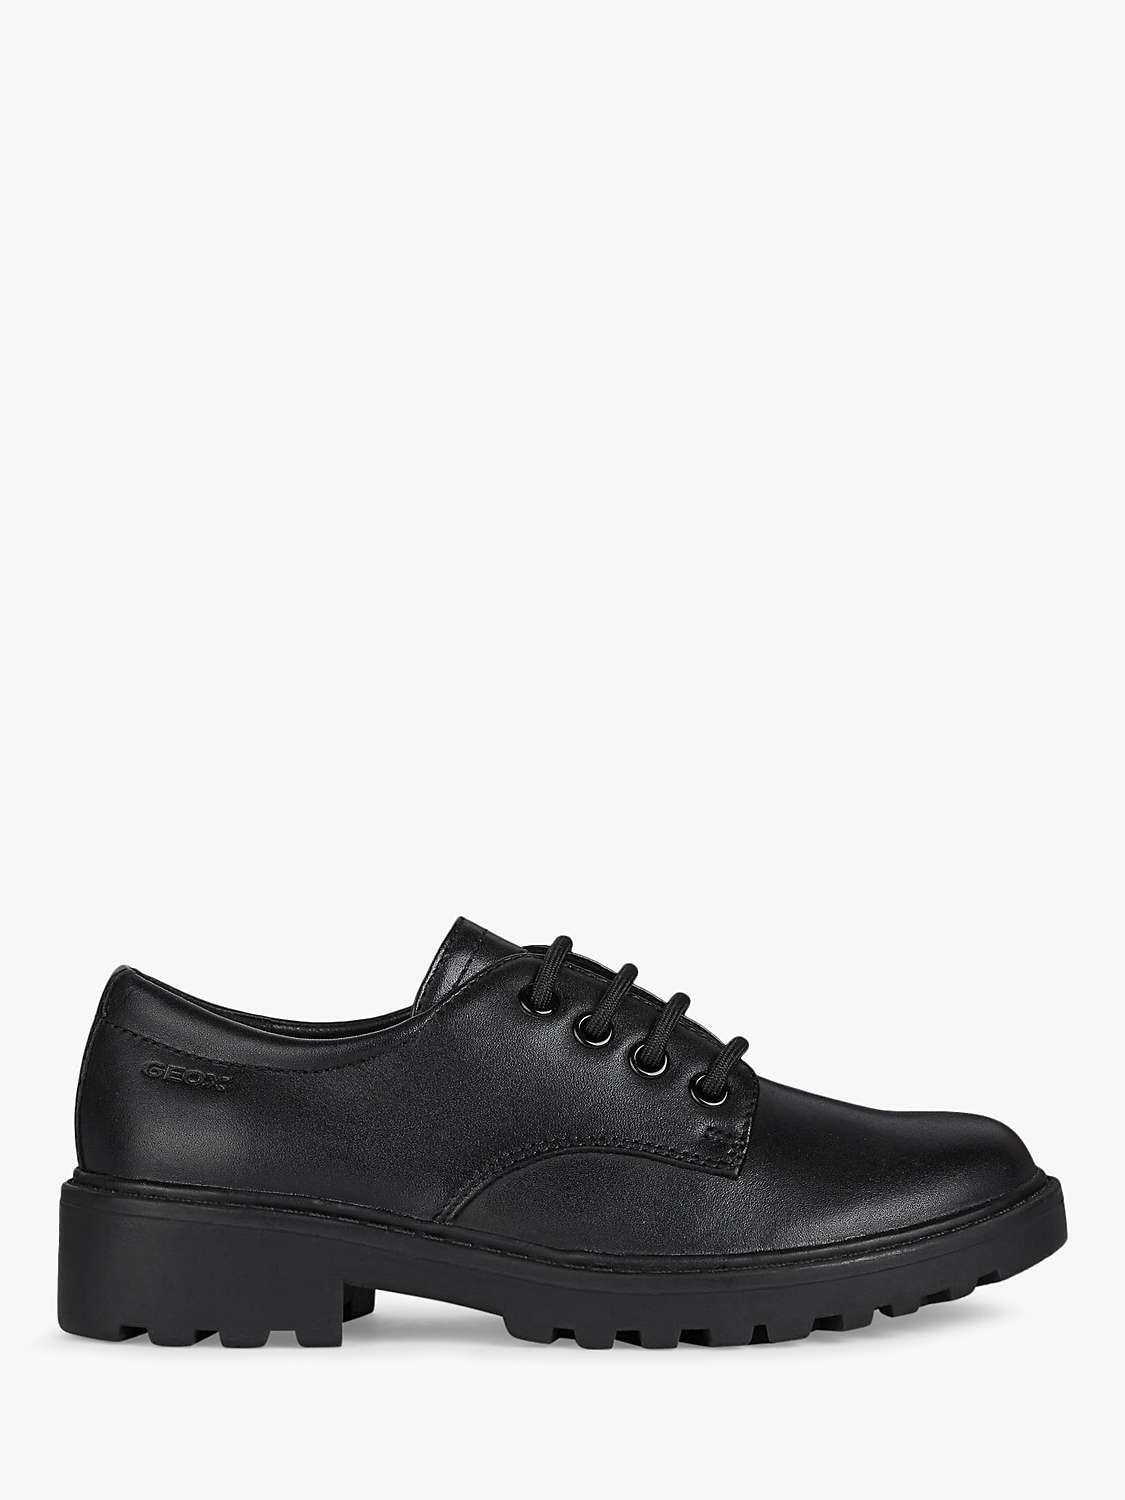 Buy Geox Kids' Casey Lace Up School Shoes, Black Online at johnlewis.com